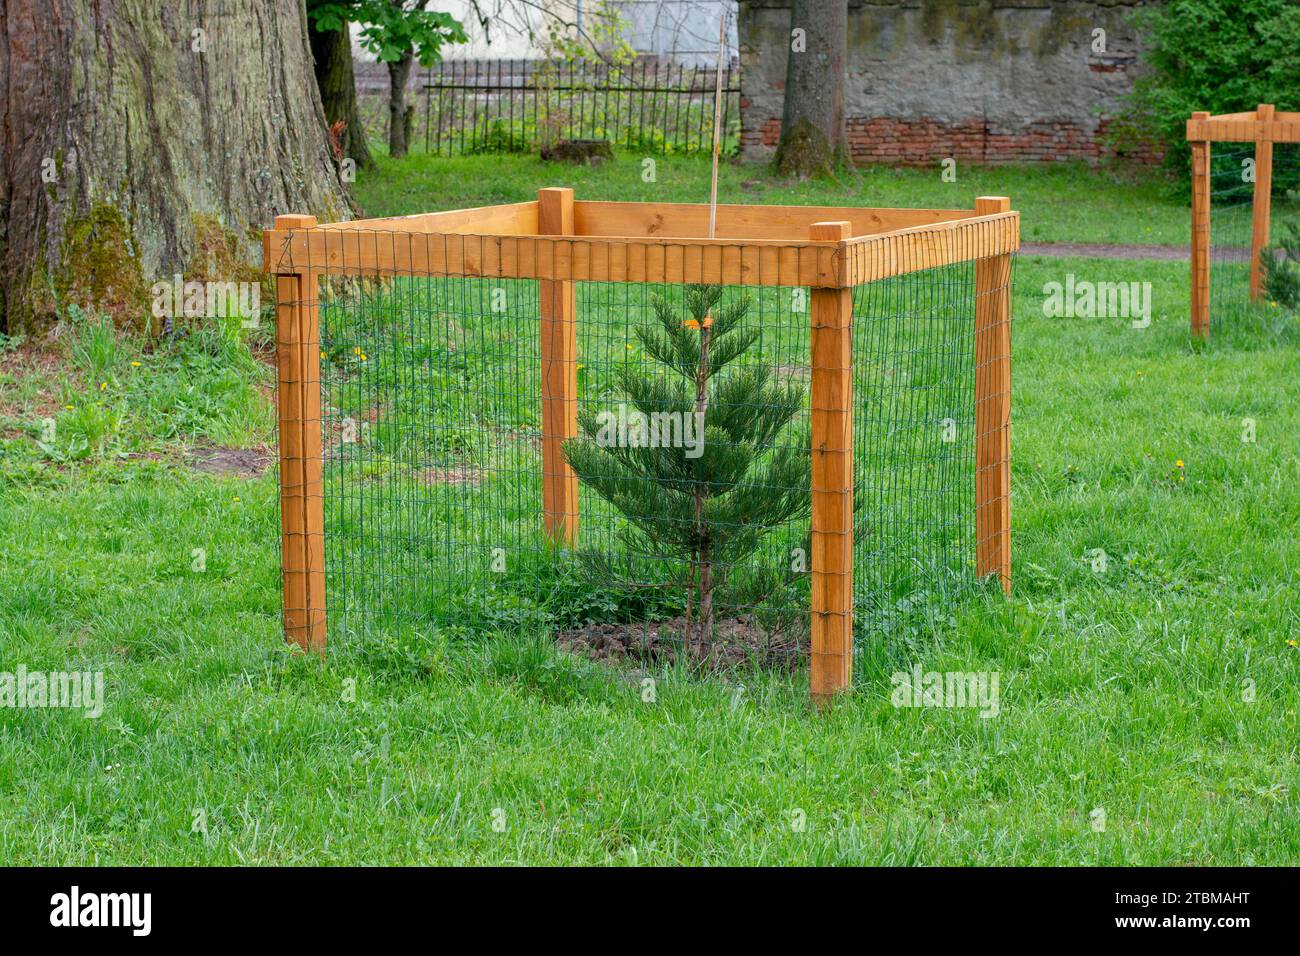 Mesh tree guard protecting young tree from wildlife damage. Fence protecting tree in the park Stock Photo